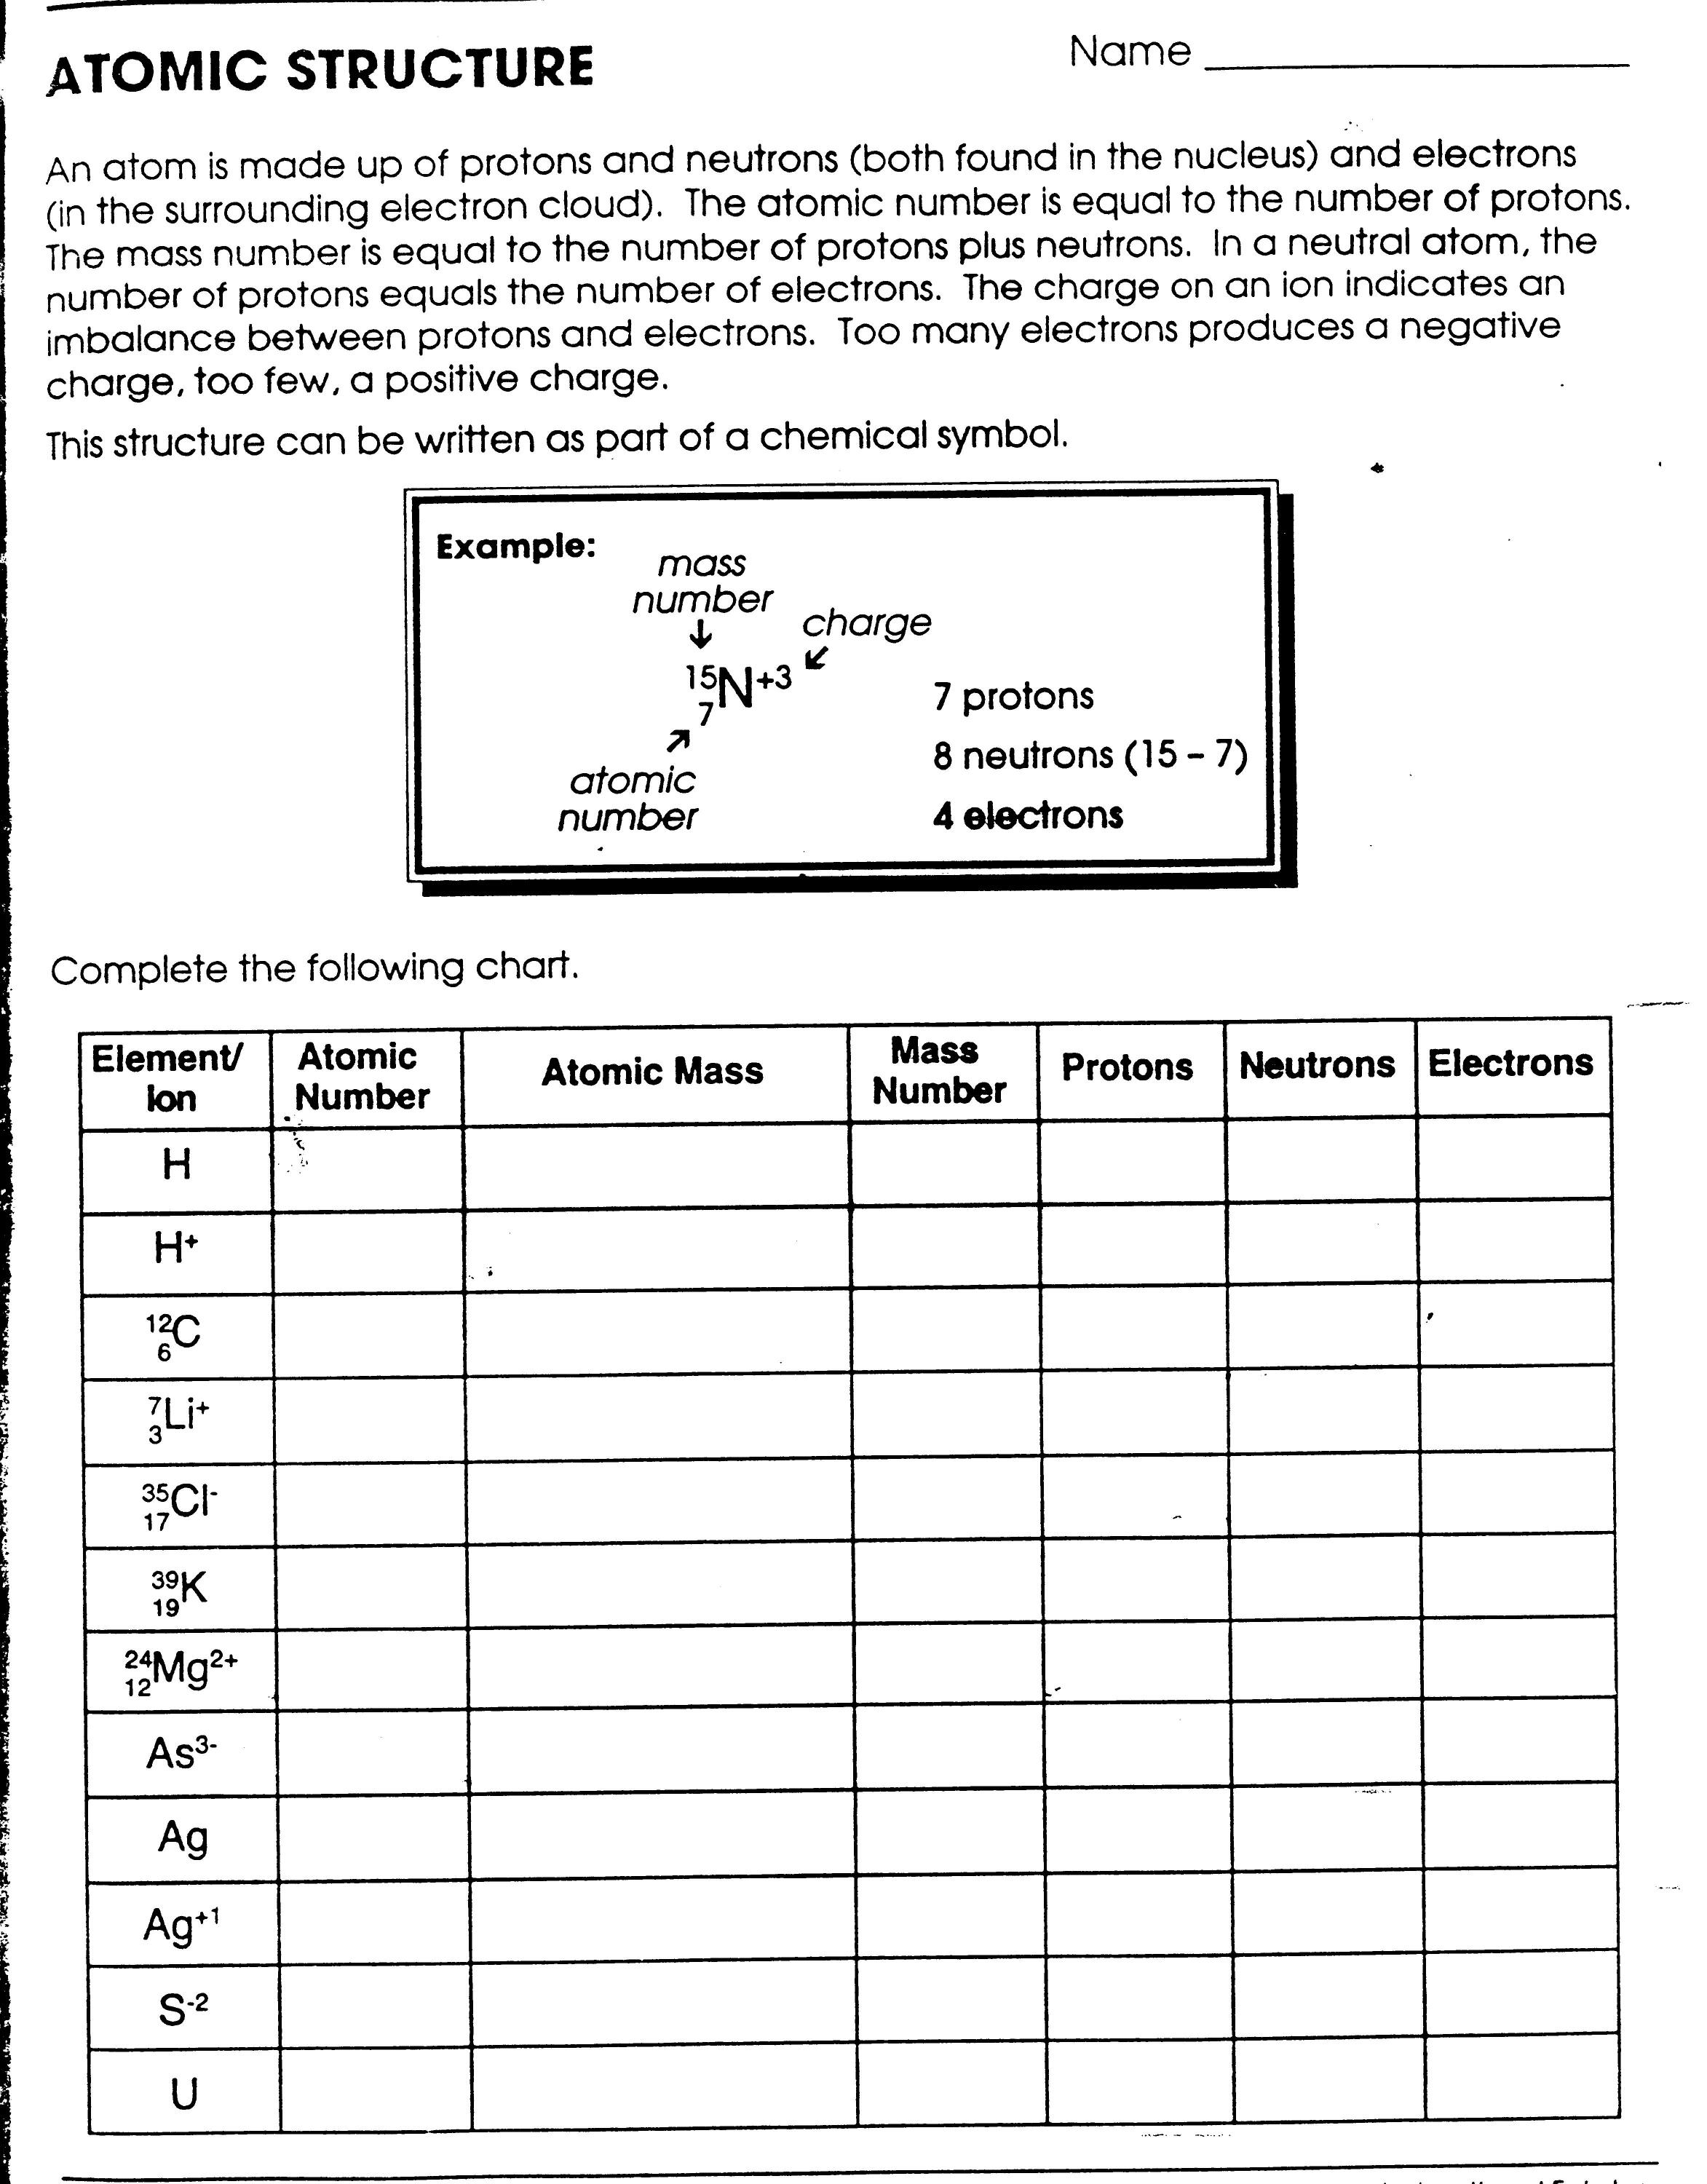 atomic-structure-worksheet-with-answers